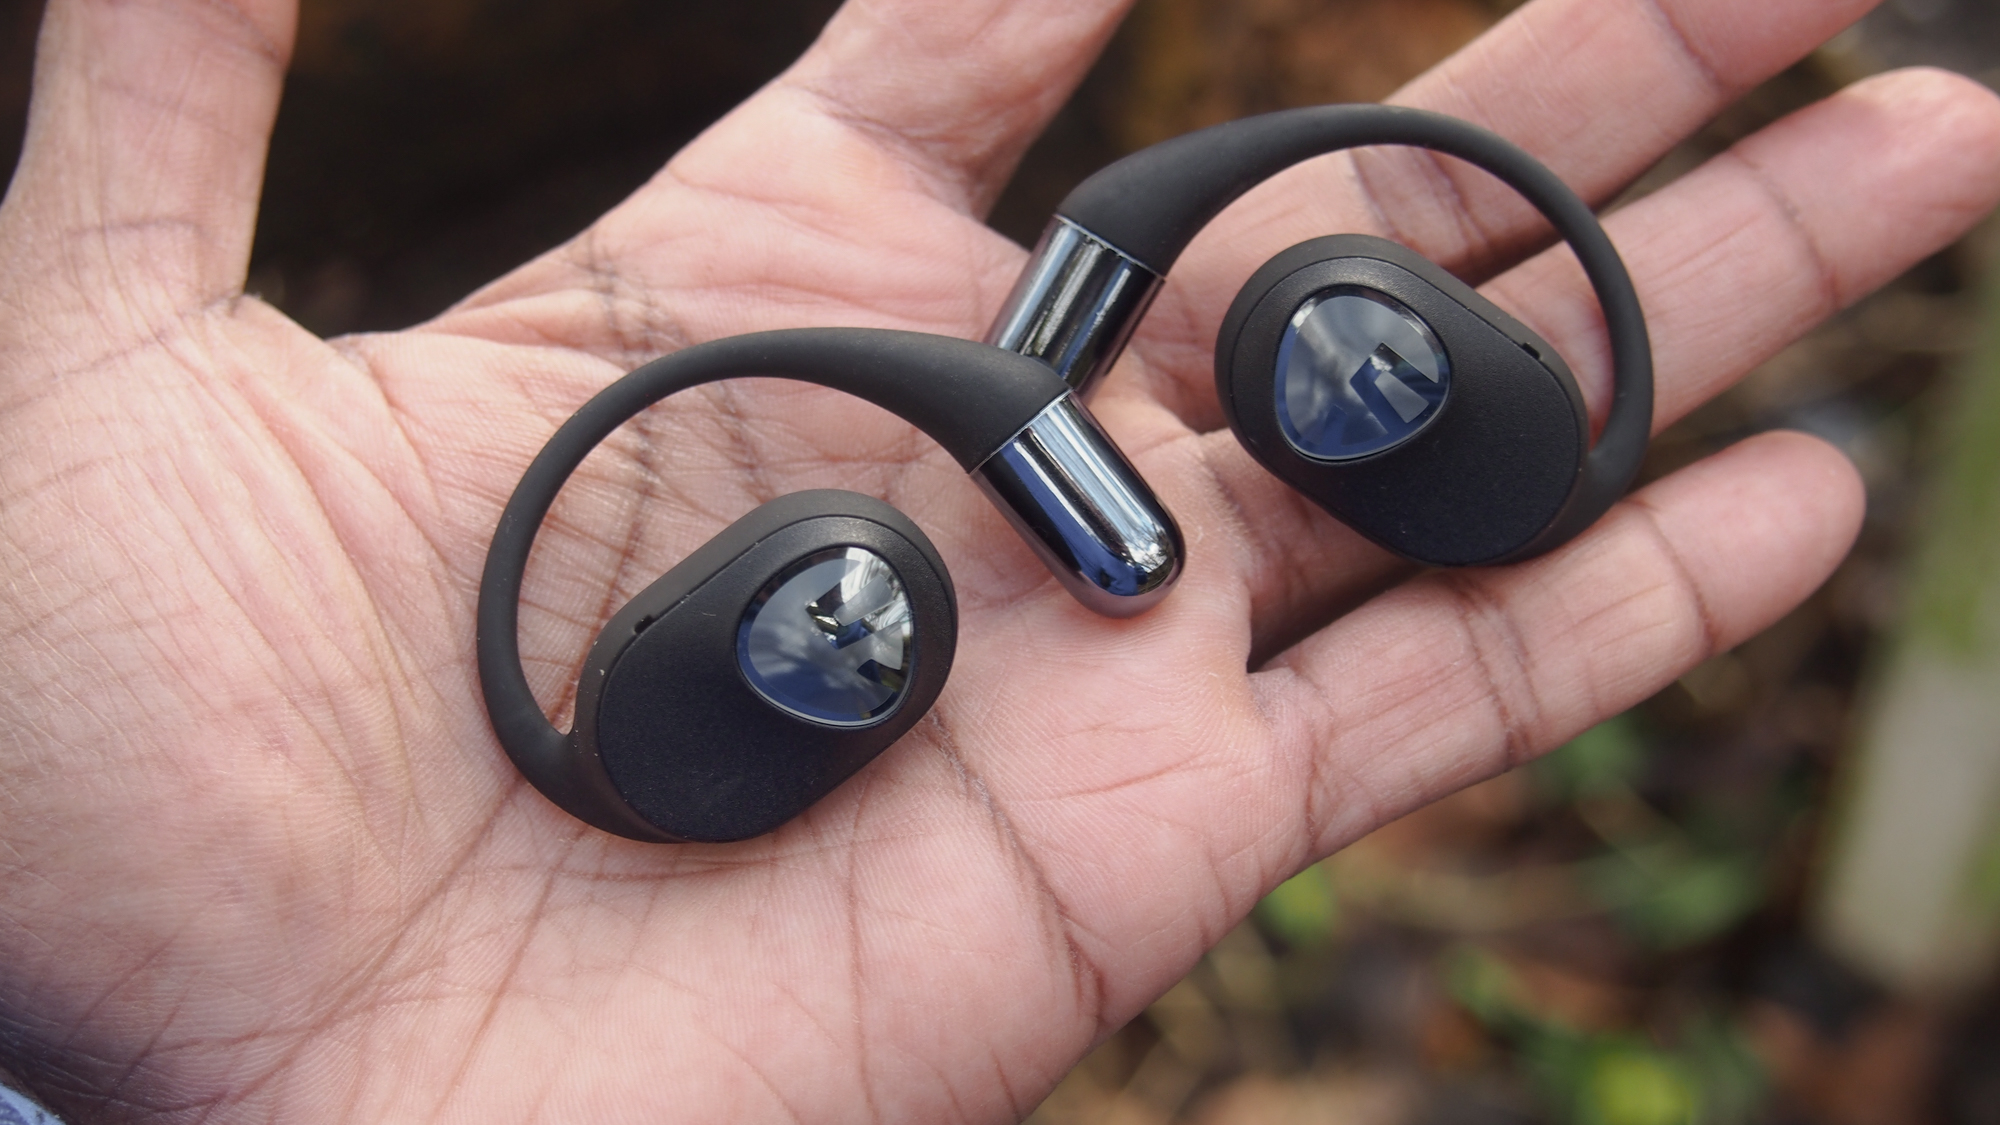 SoundPEATS GoFree2 in a person's hand